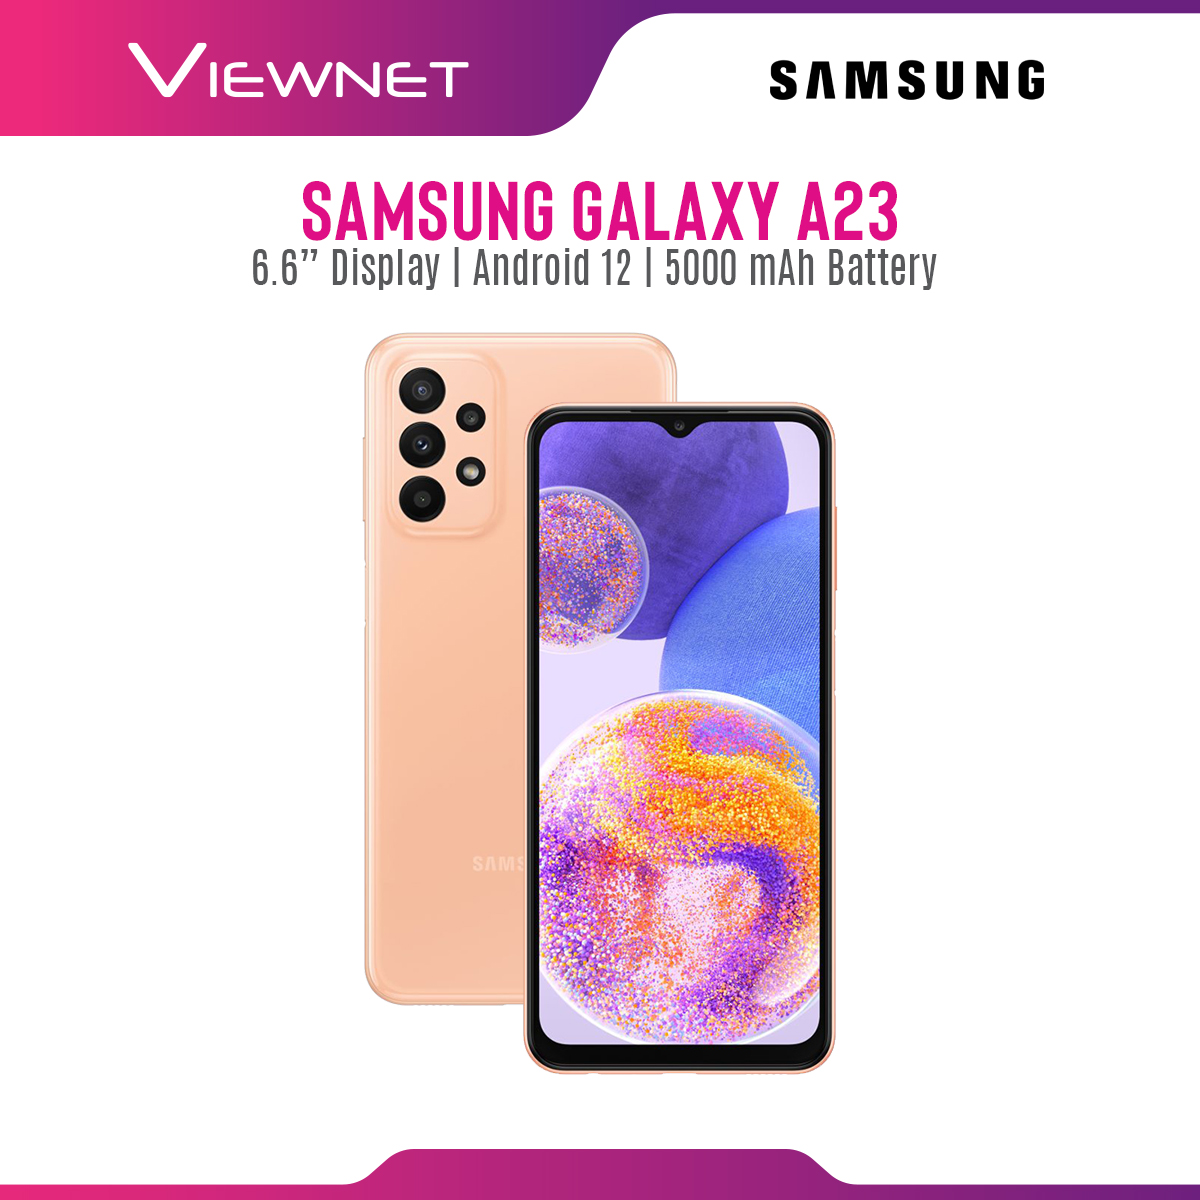 Samsung Galaxy A23 ( Peach ) 4G / LTE Smartphone with 6.6 Inch Display, Android 12, MicroSD Slot Up to 1TB, 5000 mAh Battery